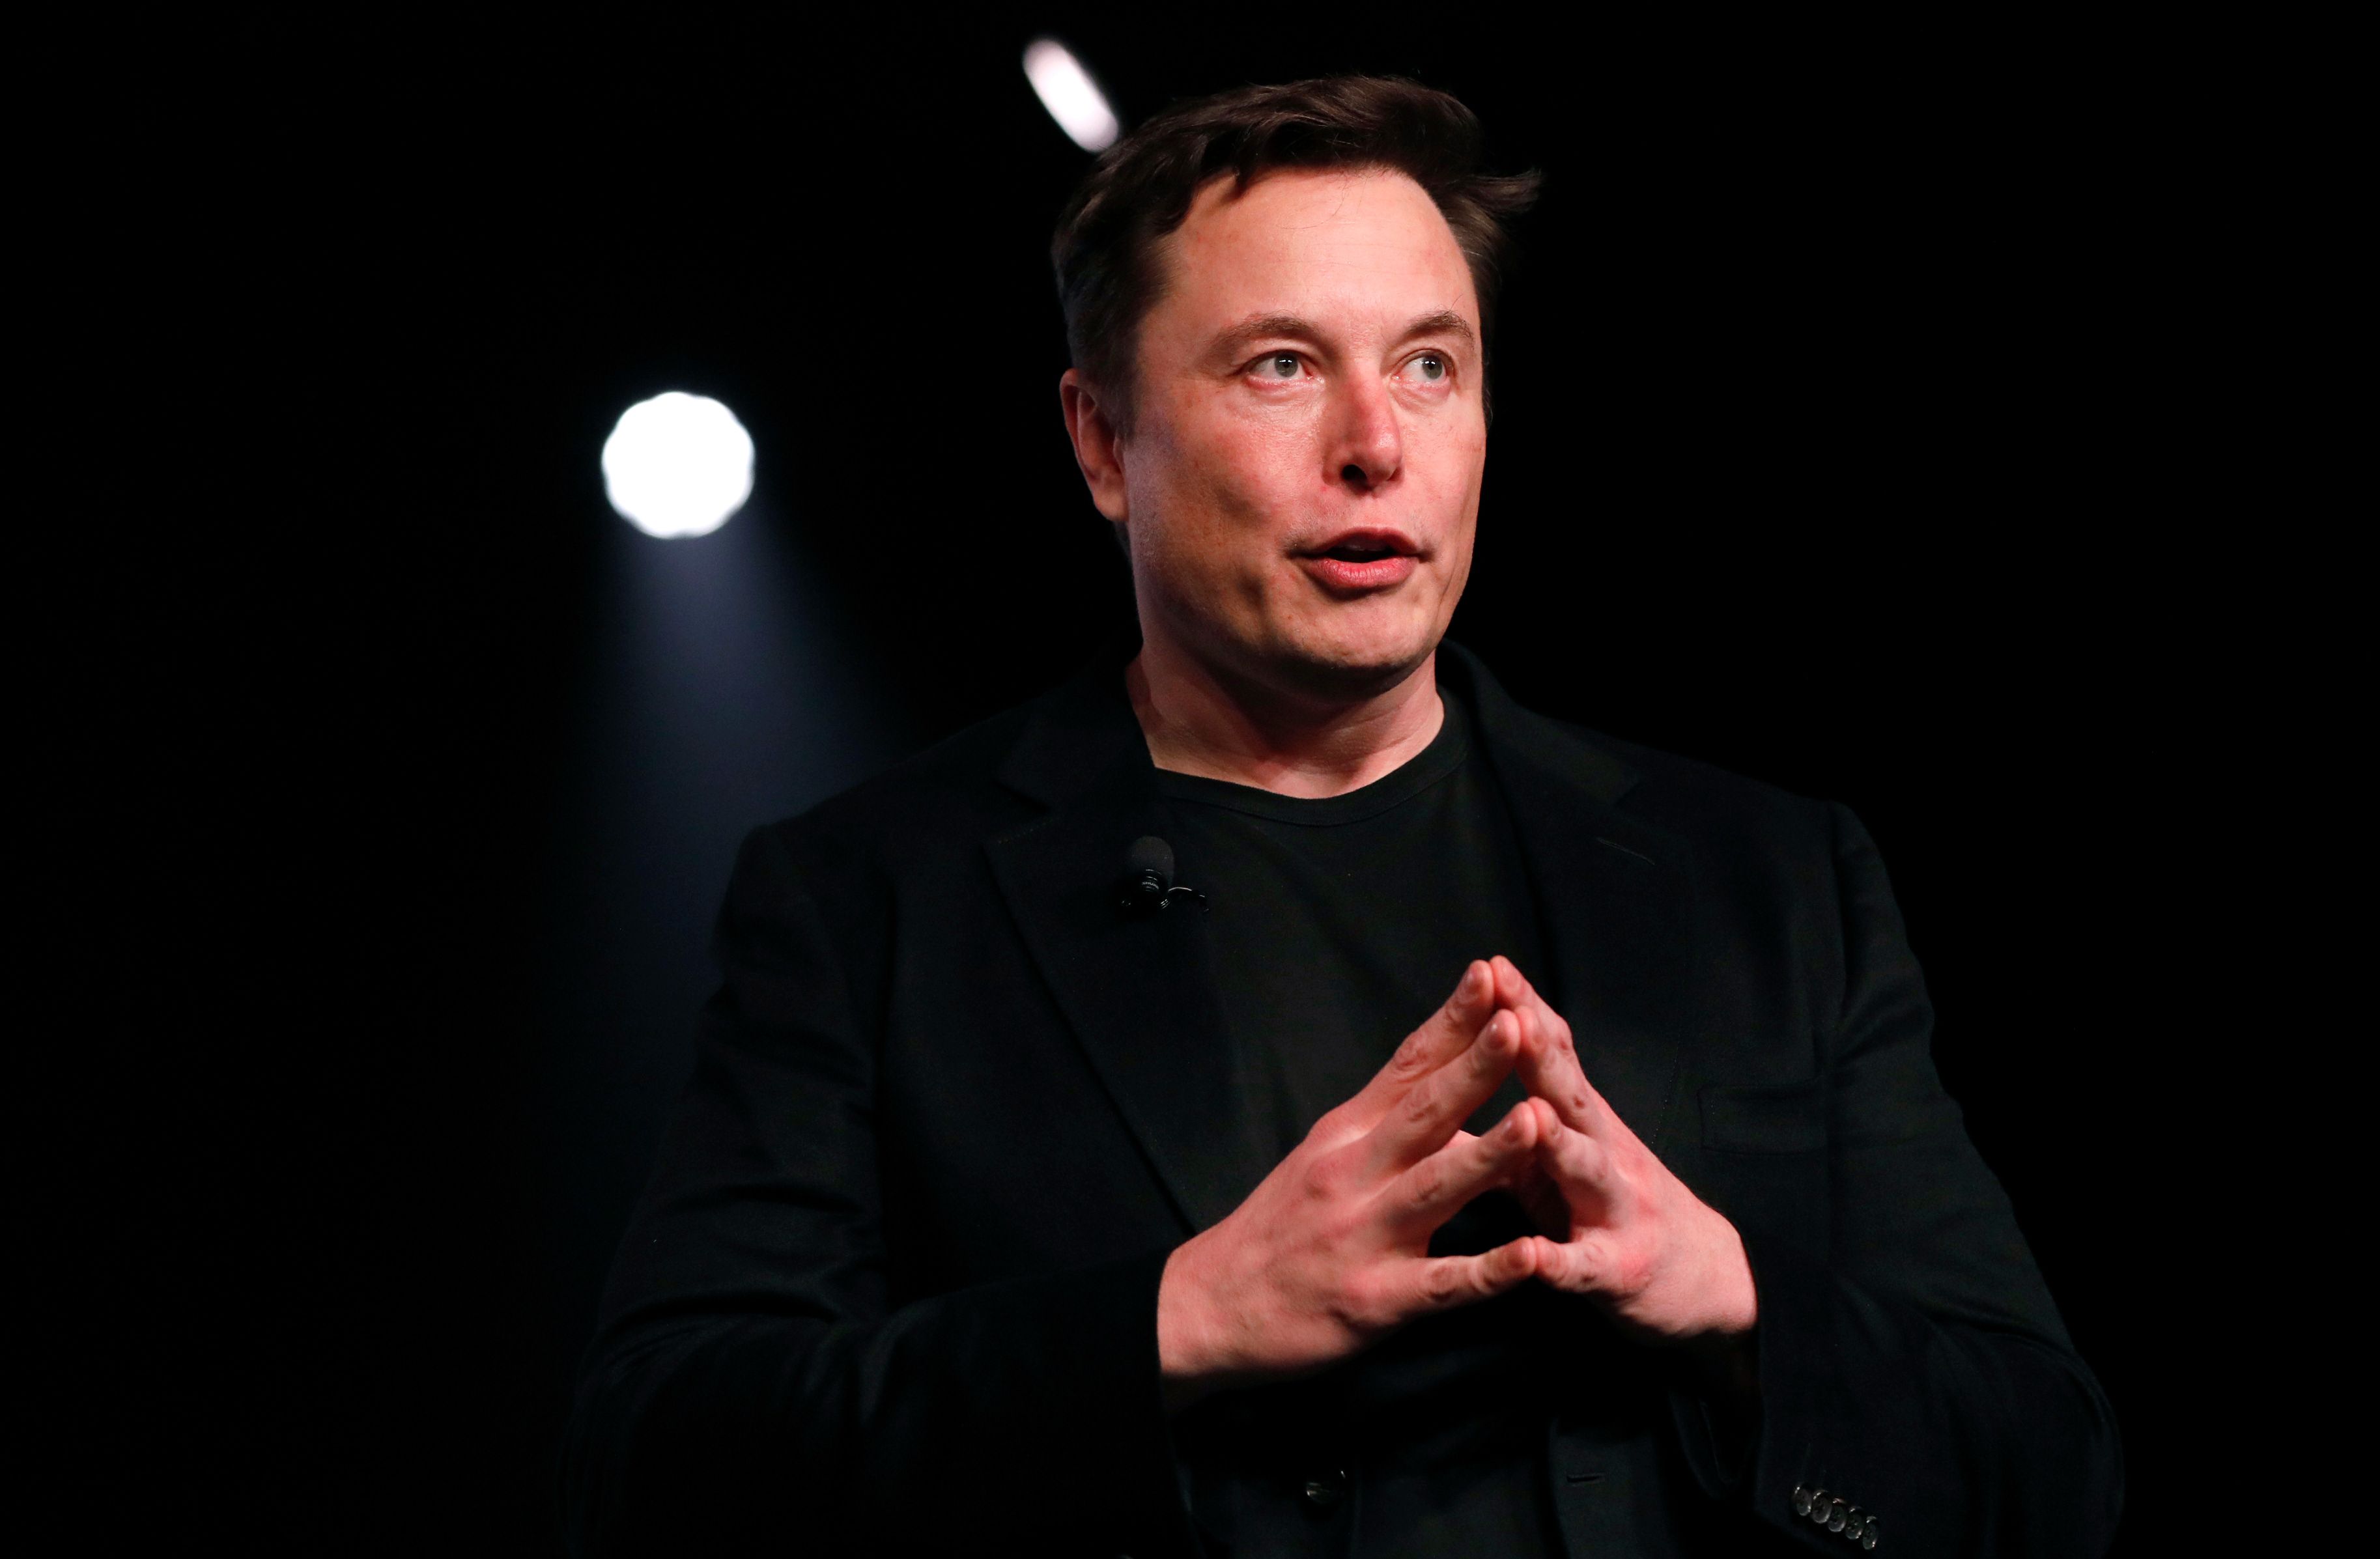 Morgan Stanley isn't sure how to value Tesla anymore